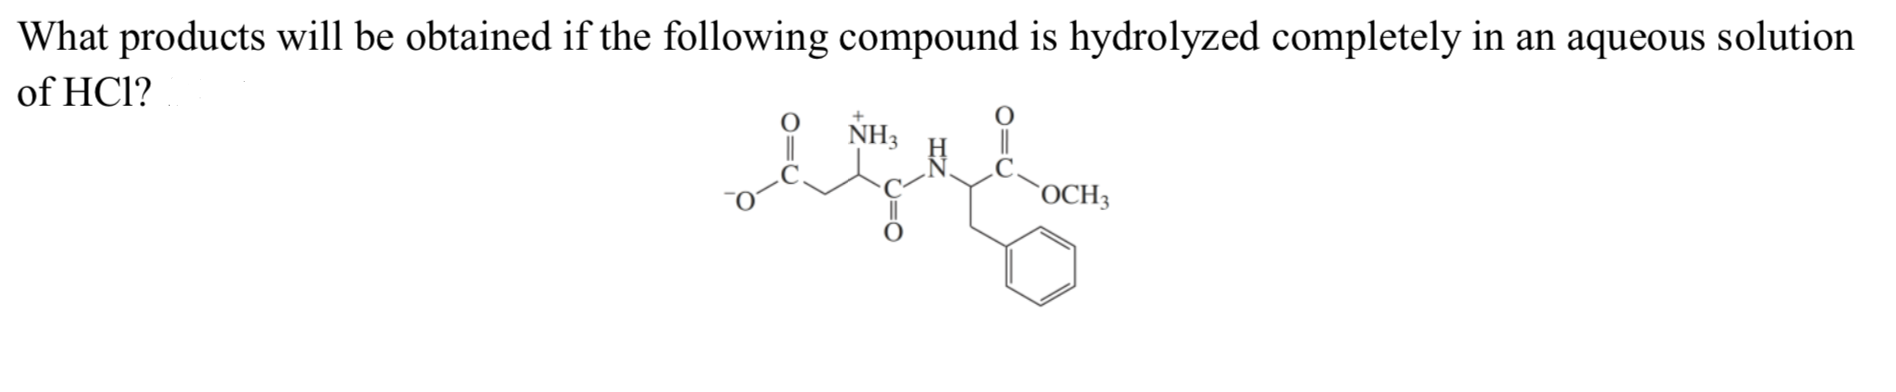 What products will be obtained if the following compound is hydrolyzed completely in an aqueous solution
of HCl?
NH3
`OCH3
